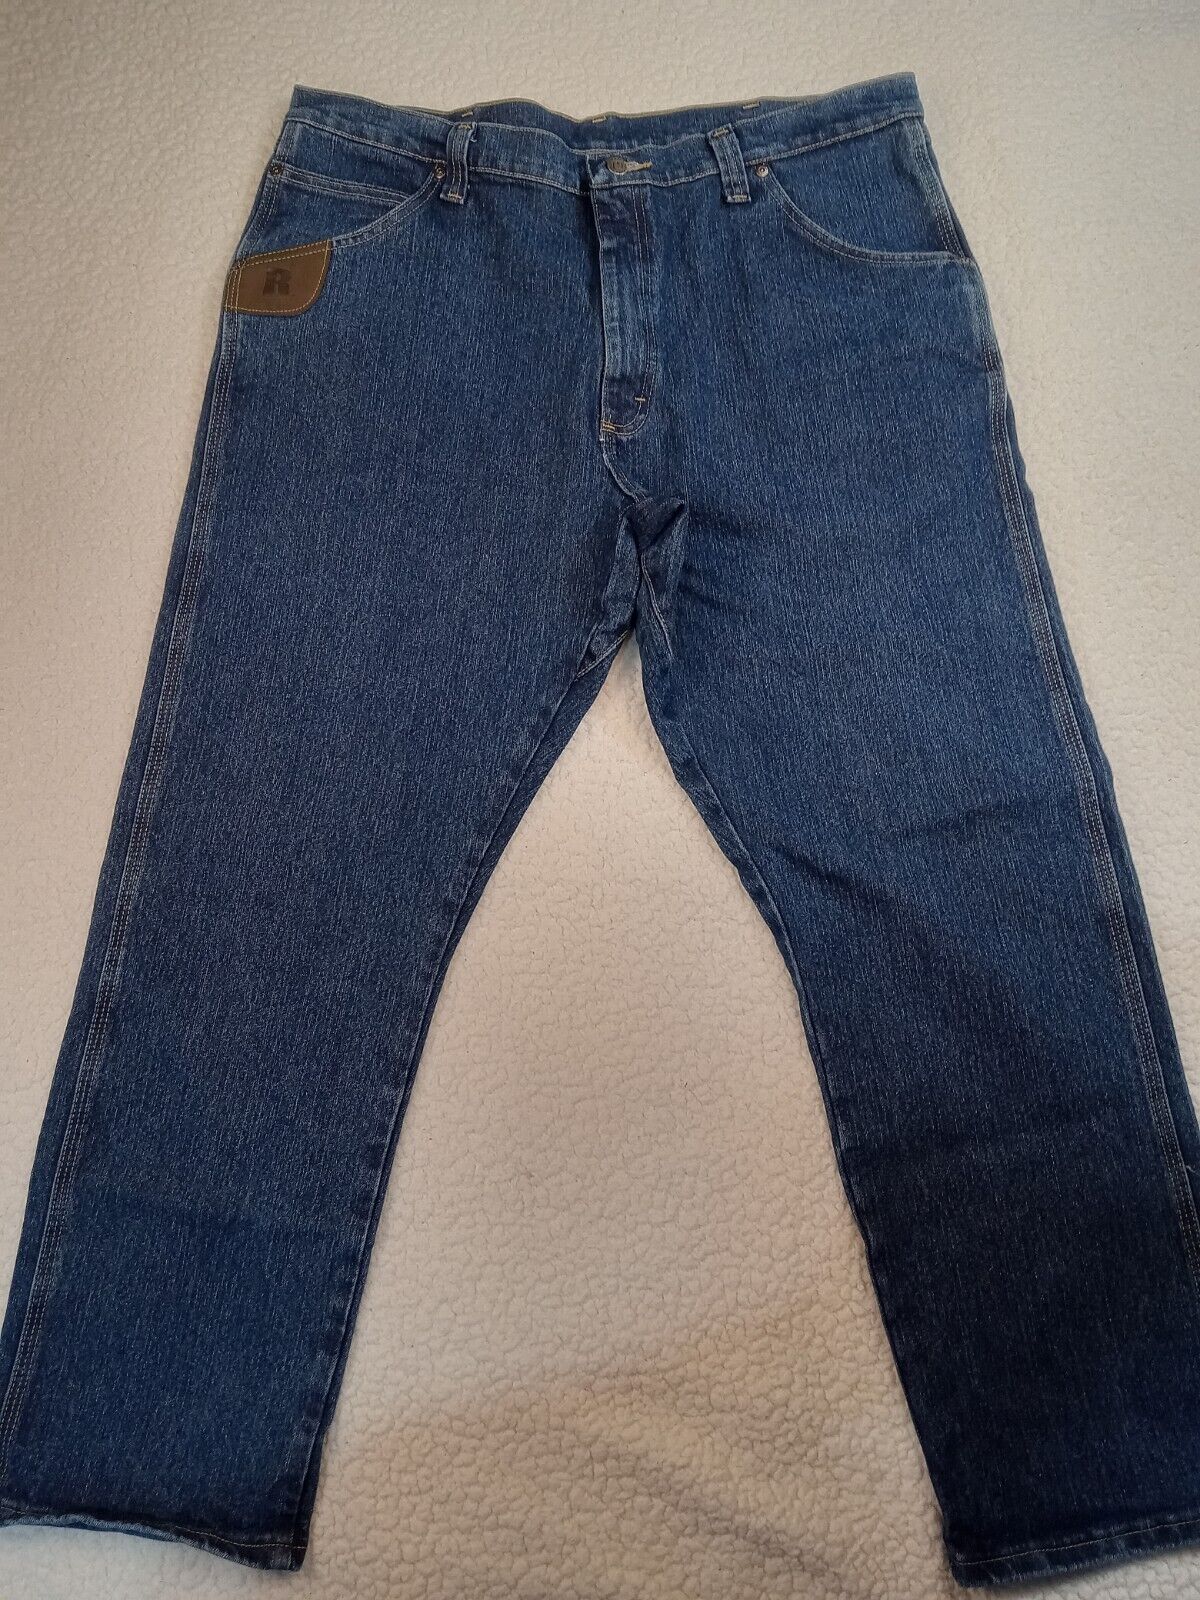 Wrangler Riggs Workwear Mens 40x30 Lot Of 2 Blue Jeans